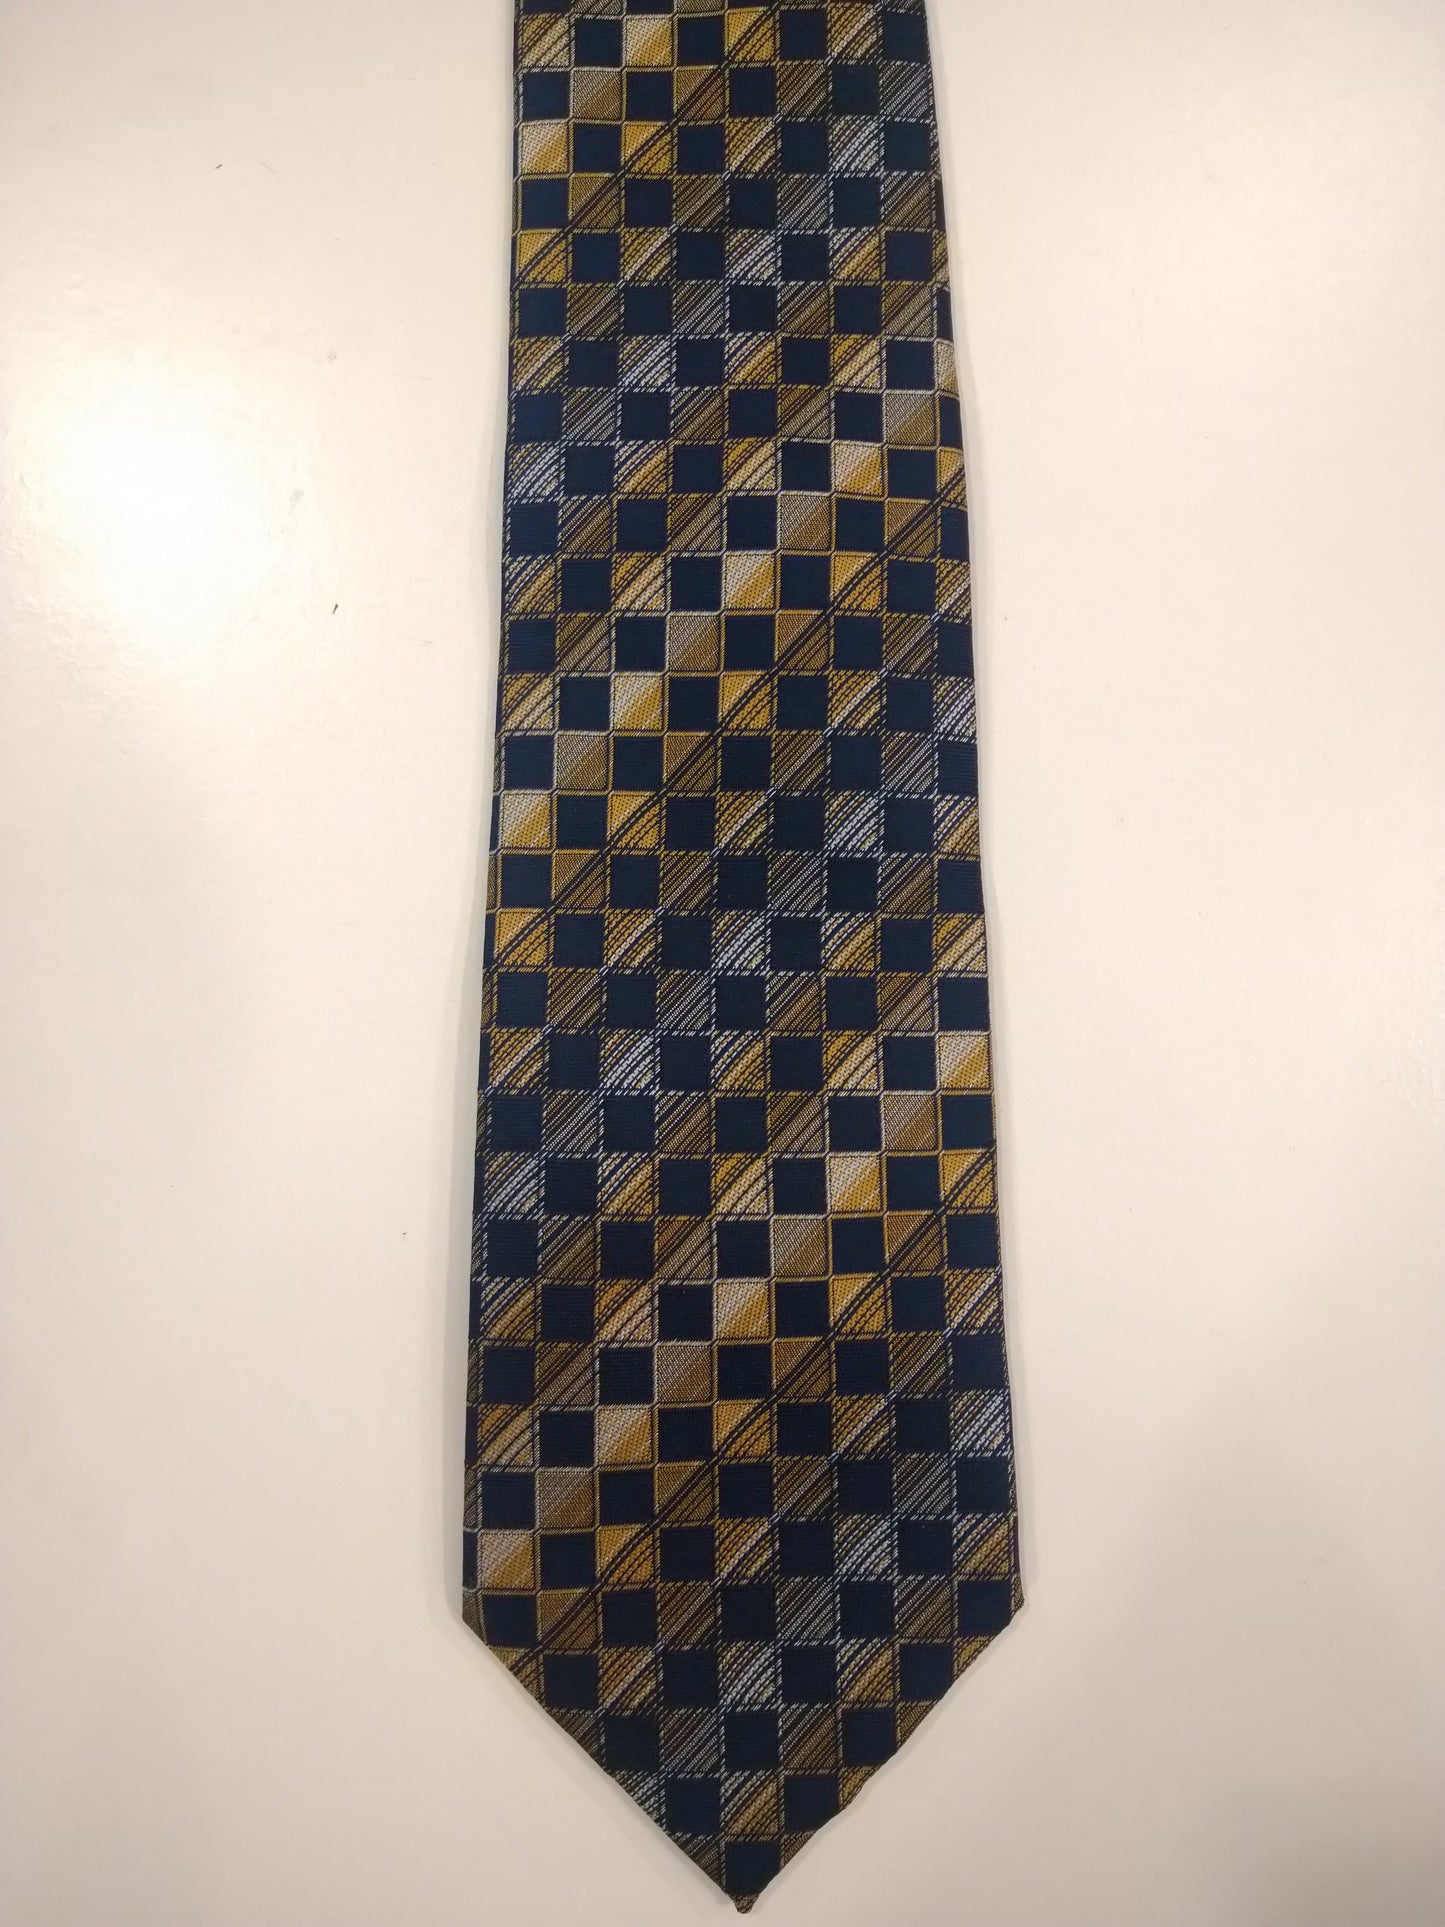 Skopes polyester tie. Separate blue gray yellow motif.